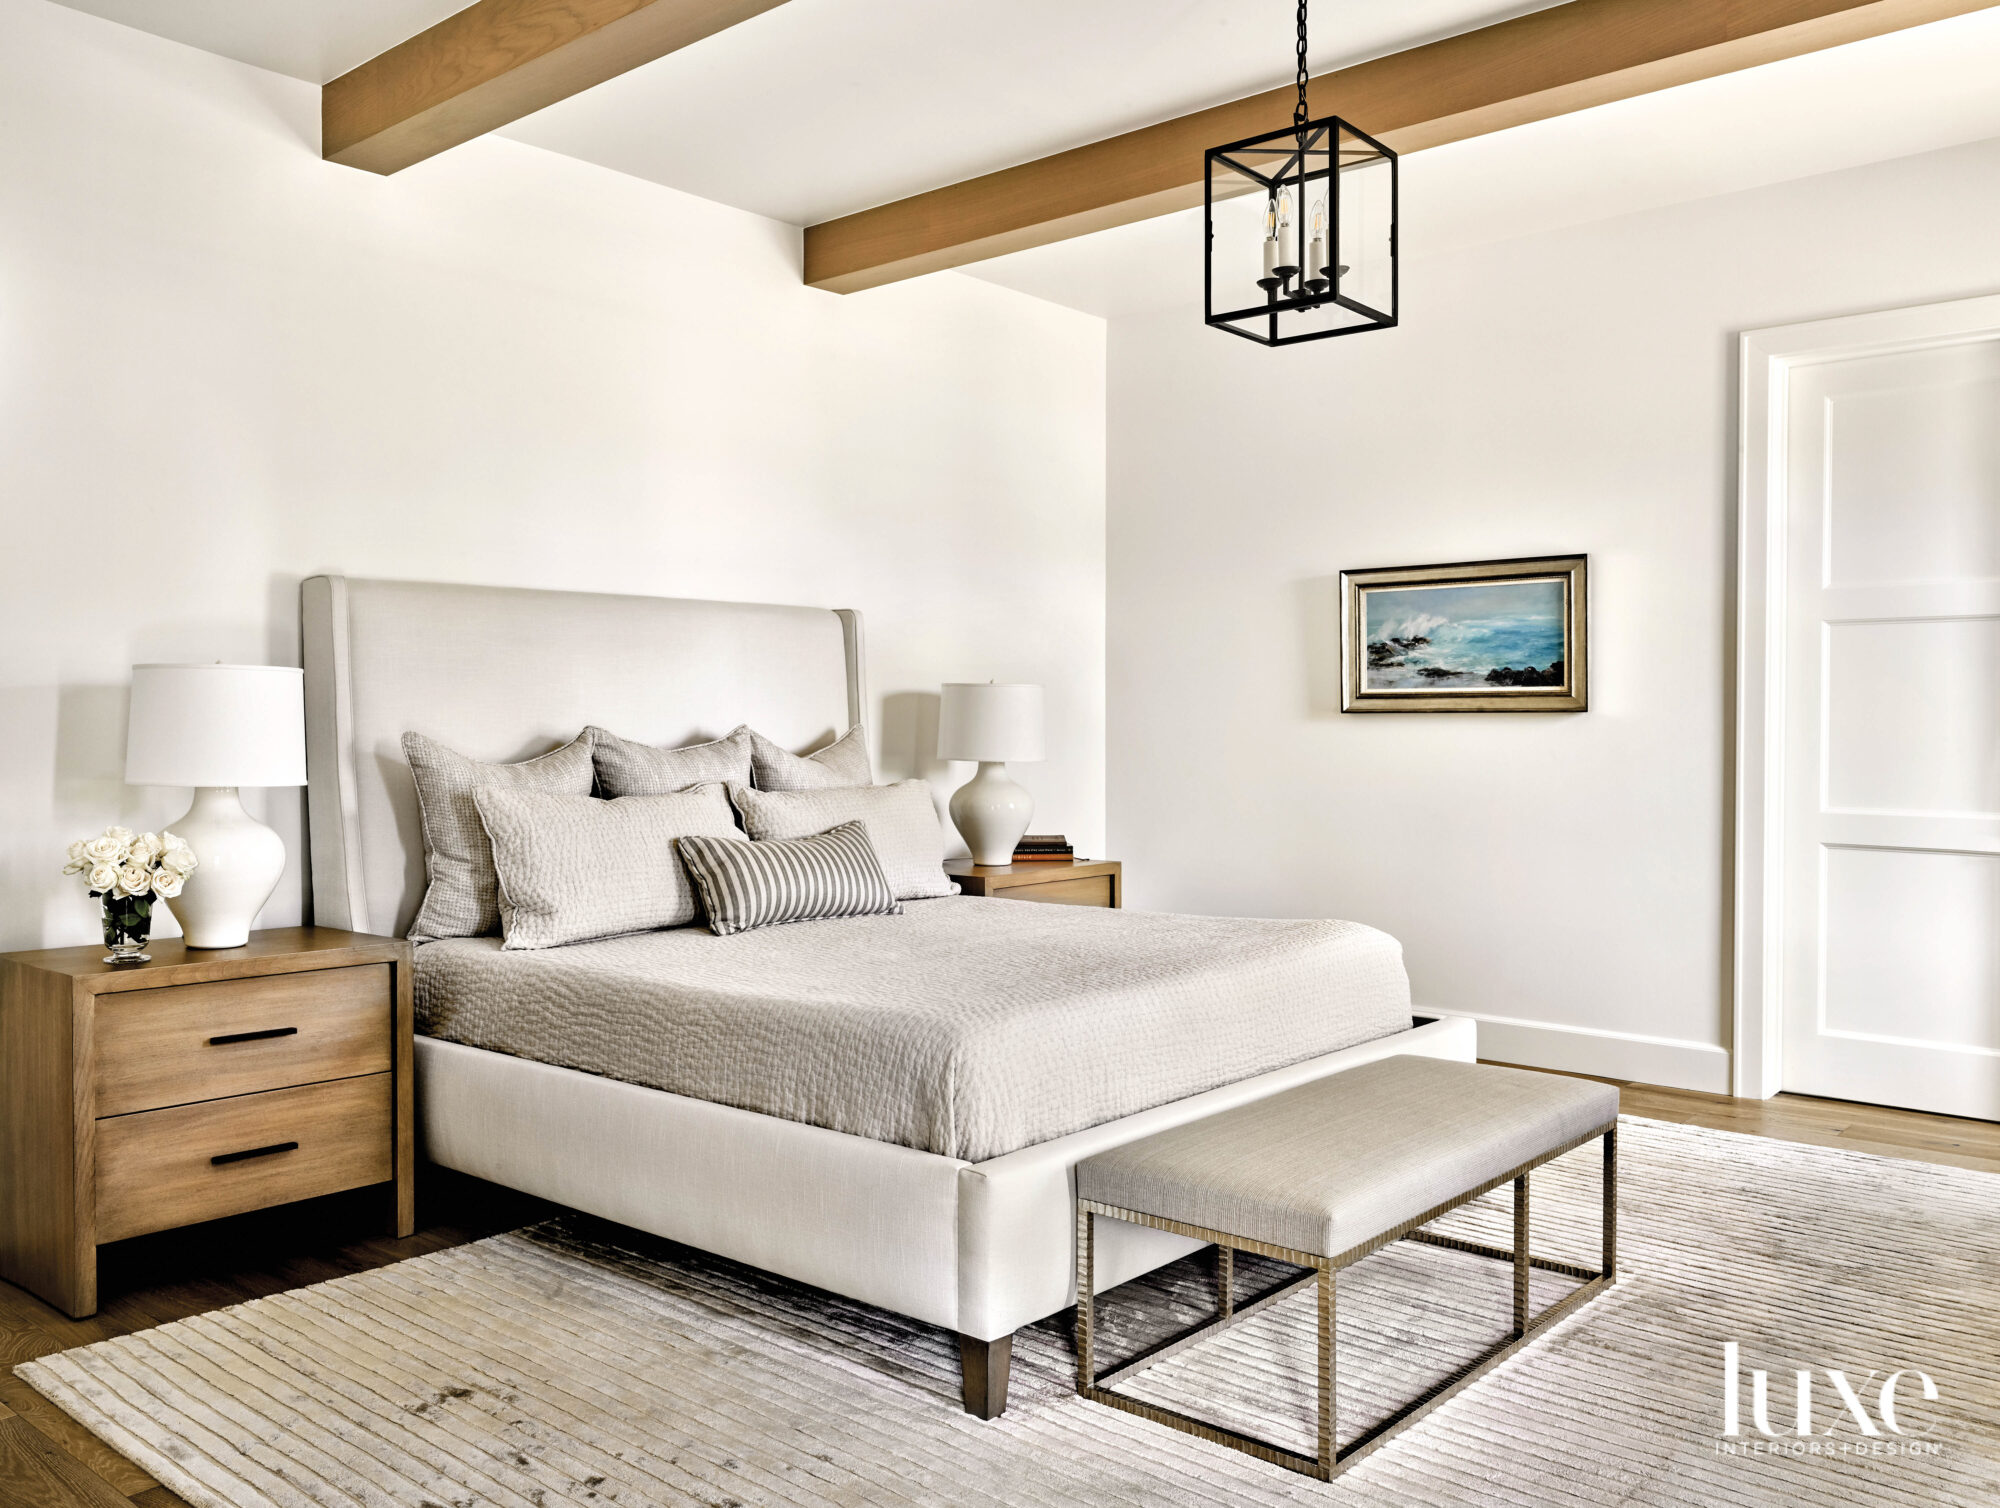 The bed and bed linens are light gray. Light wood ceiling beams match the light wood nightstand.